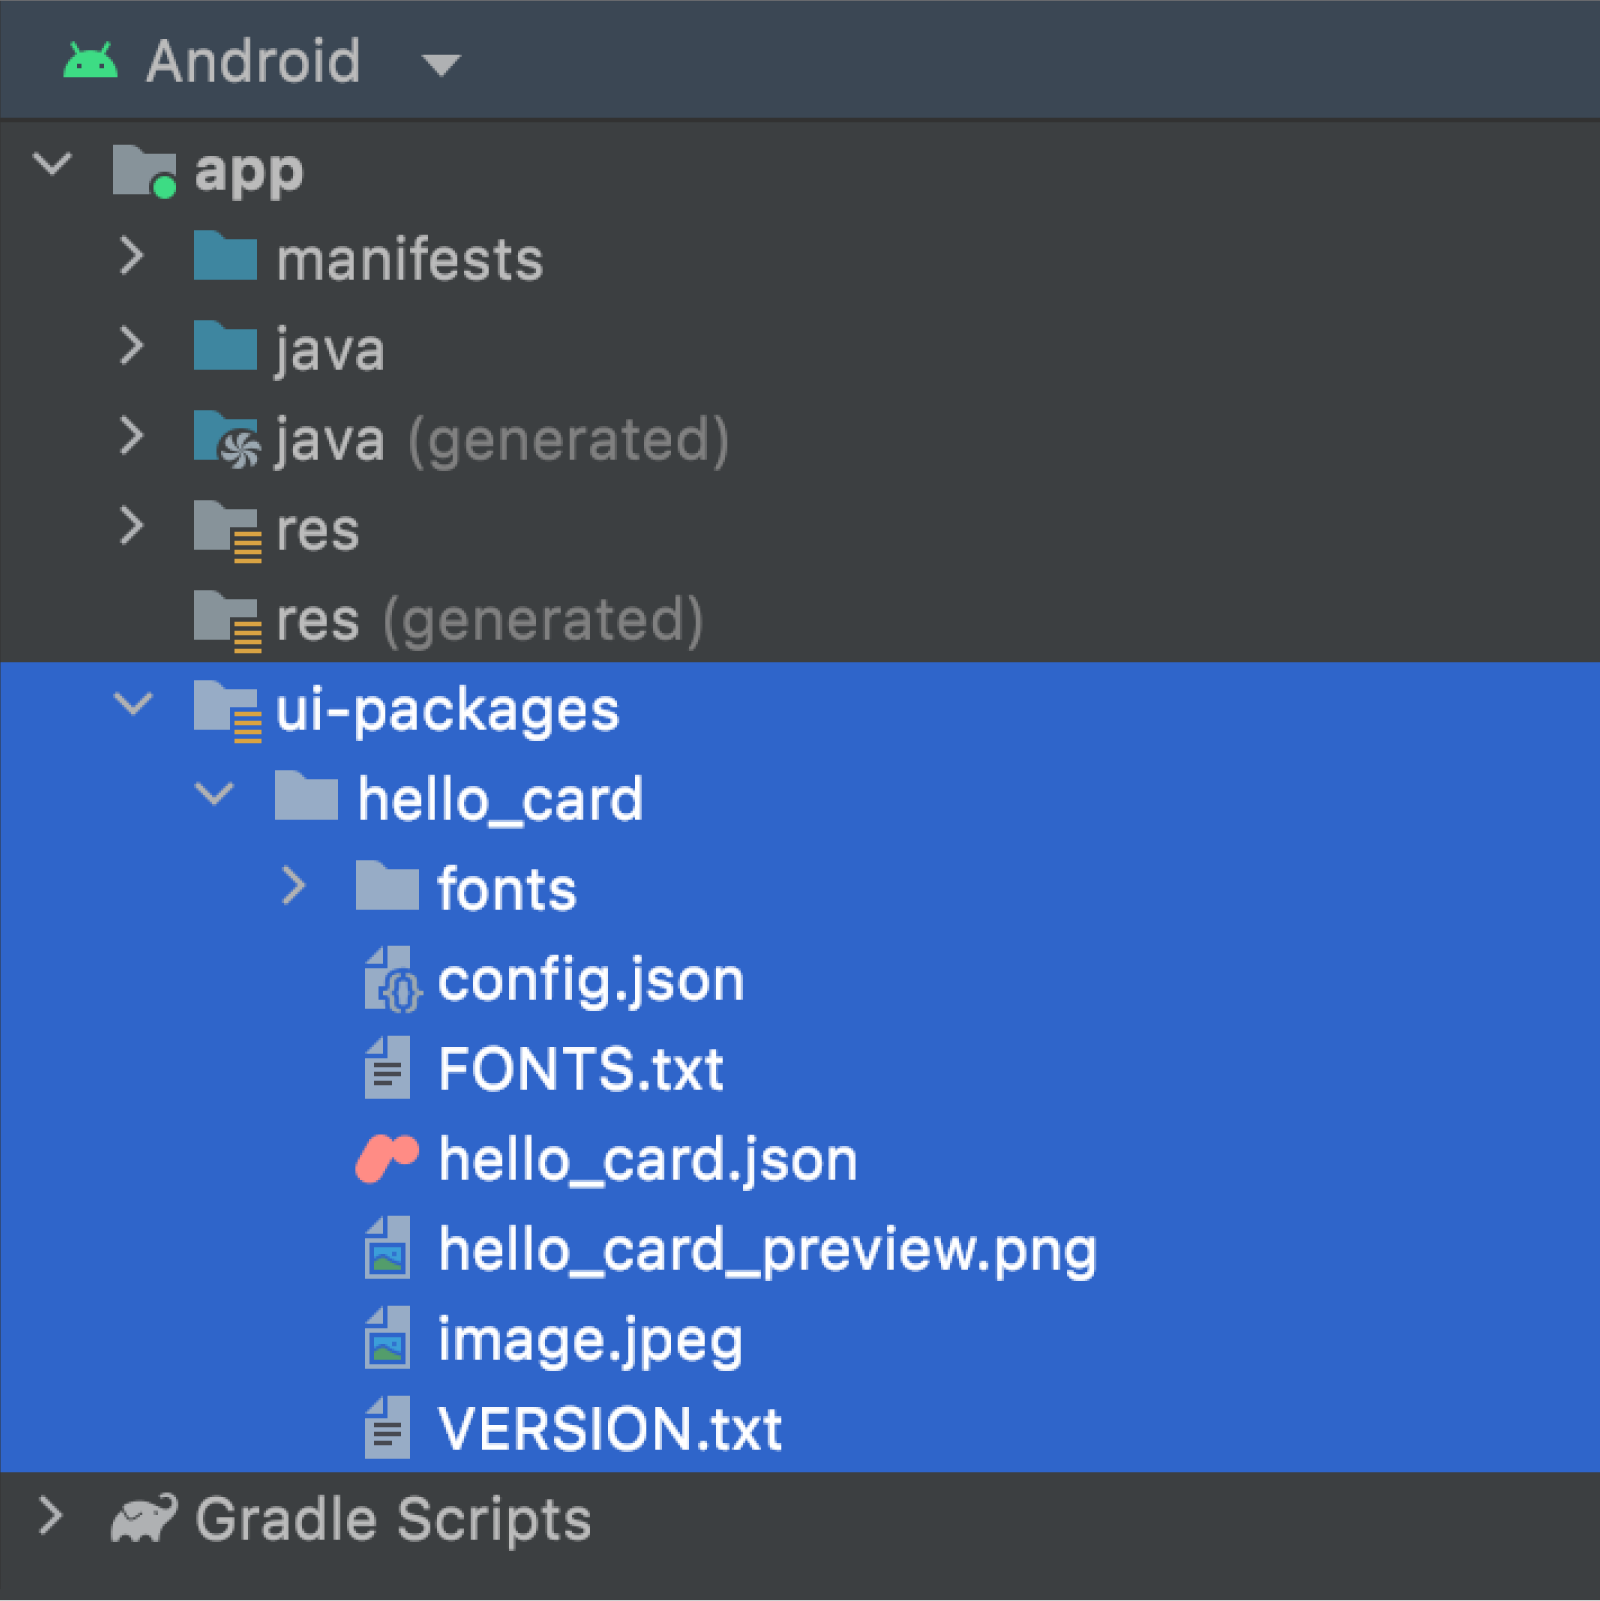 Android 뷰의 UI-packages 폴더